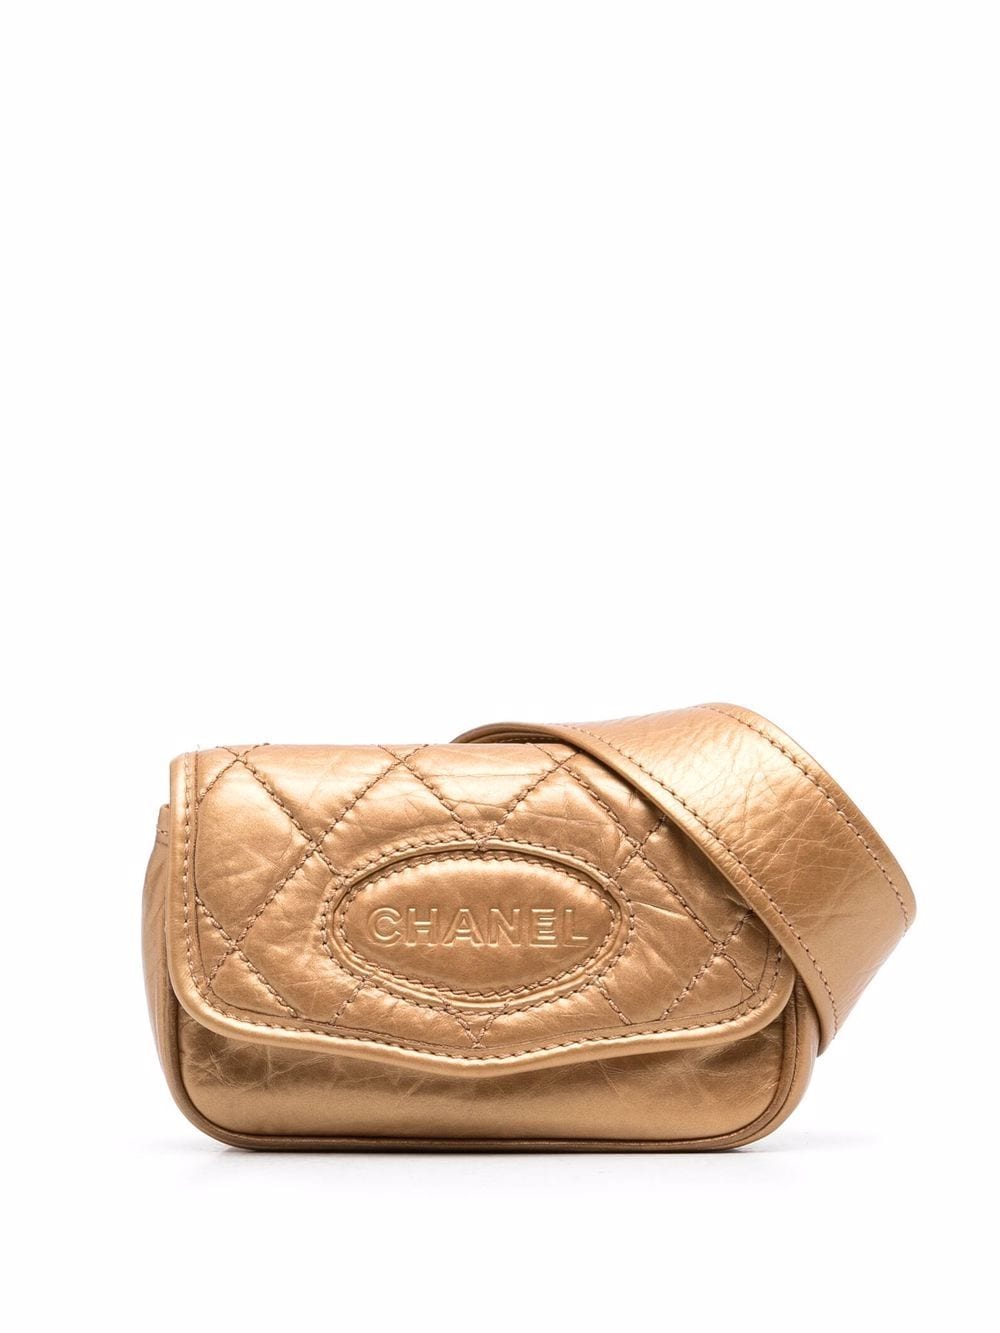 Chanel Pre-owned 2005-2006 Diamond-Quilted Belt Bag - Gold